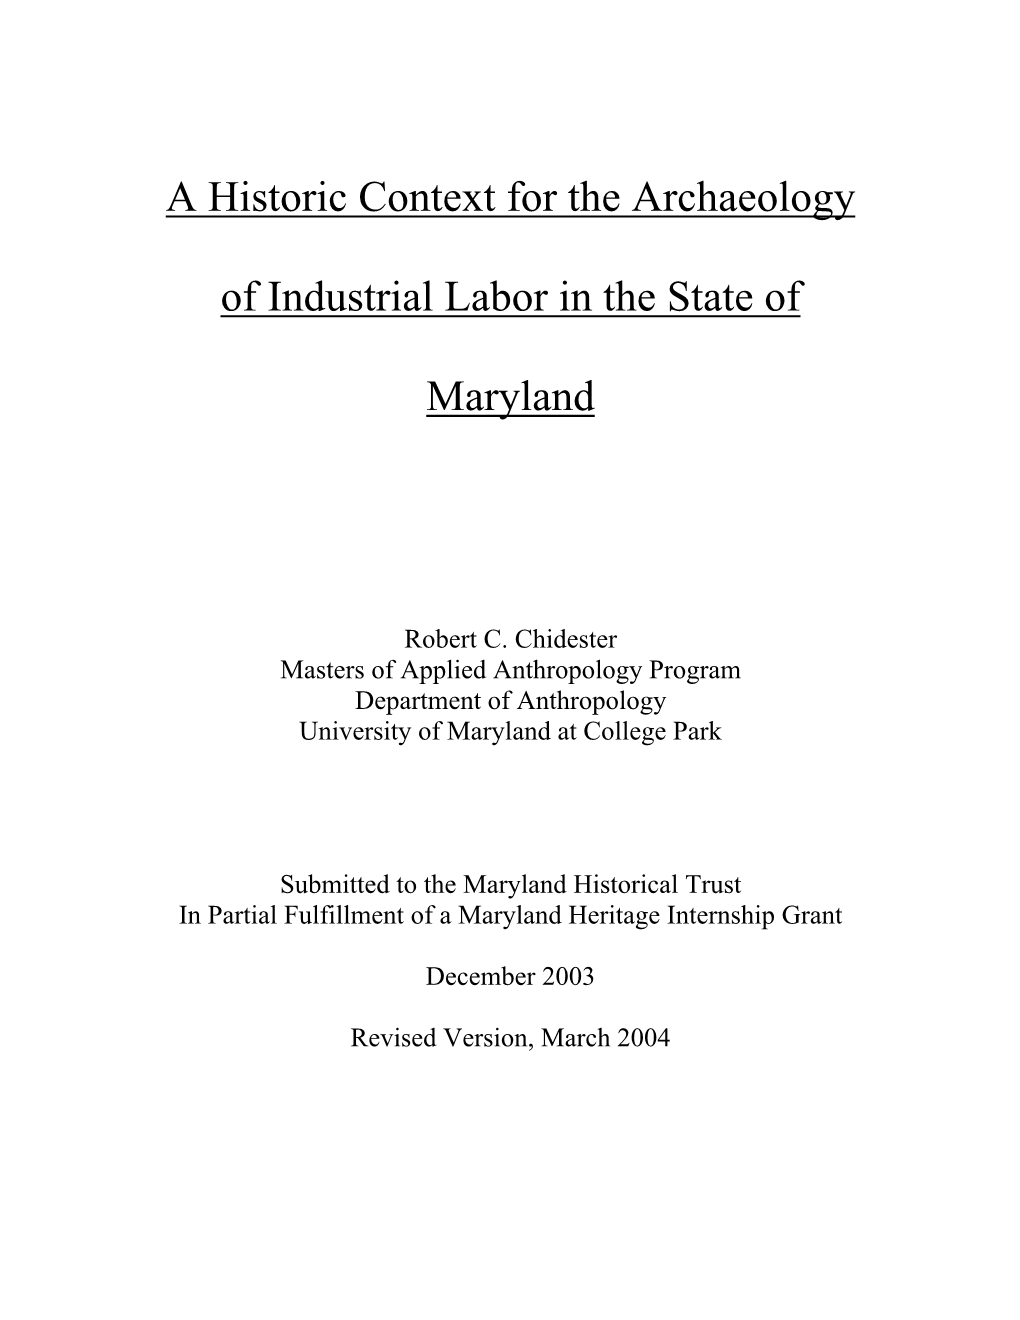 A Historic Context for the Archaeology of Industrial Labor in the State Of